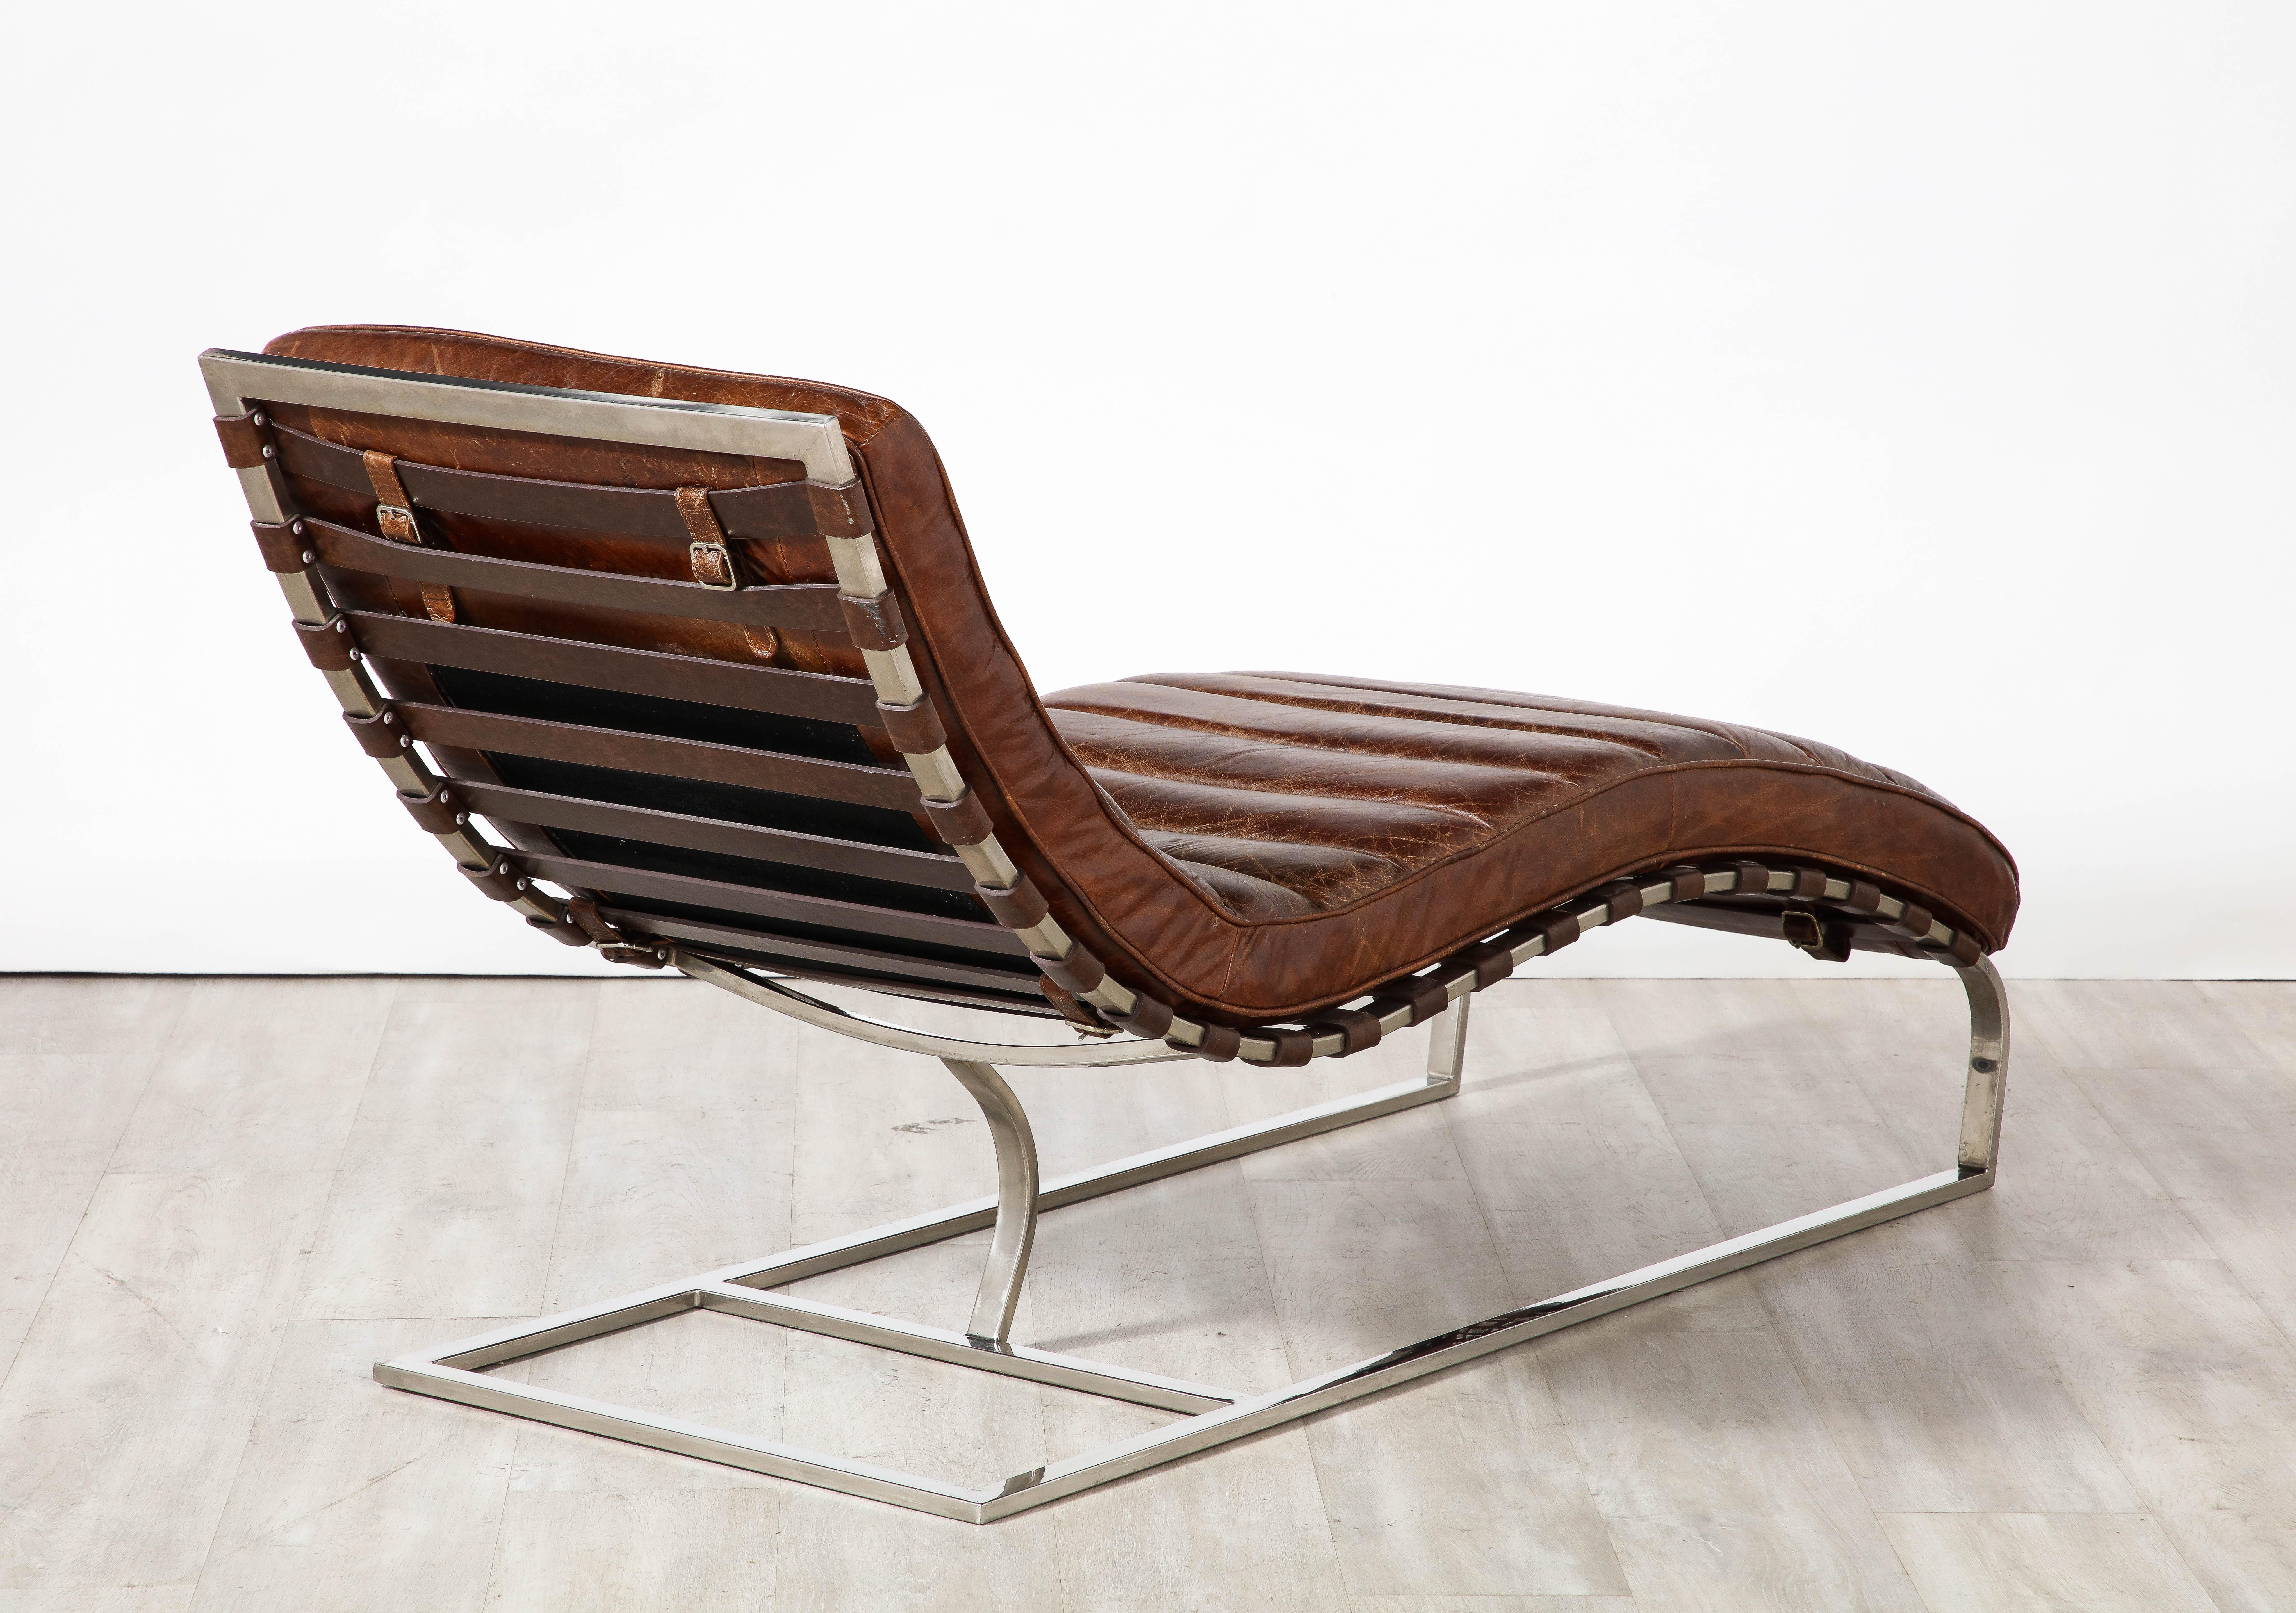 Italian Channeled Leather and Chrome Chaise Longue, 1970 For Sale 3